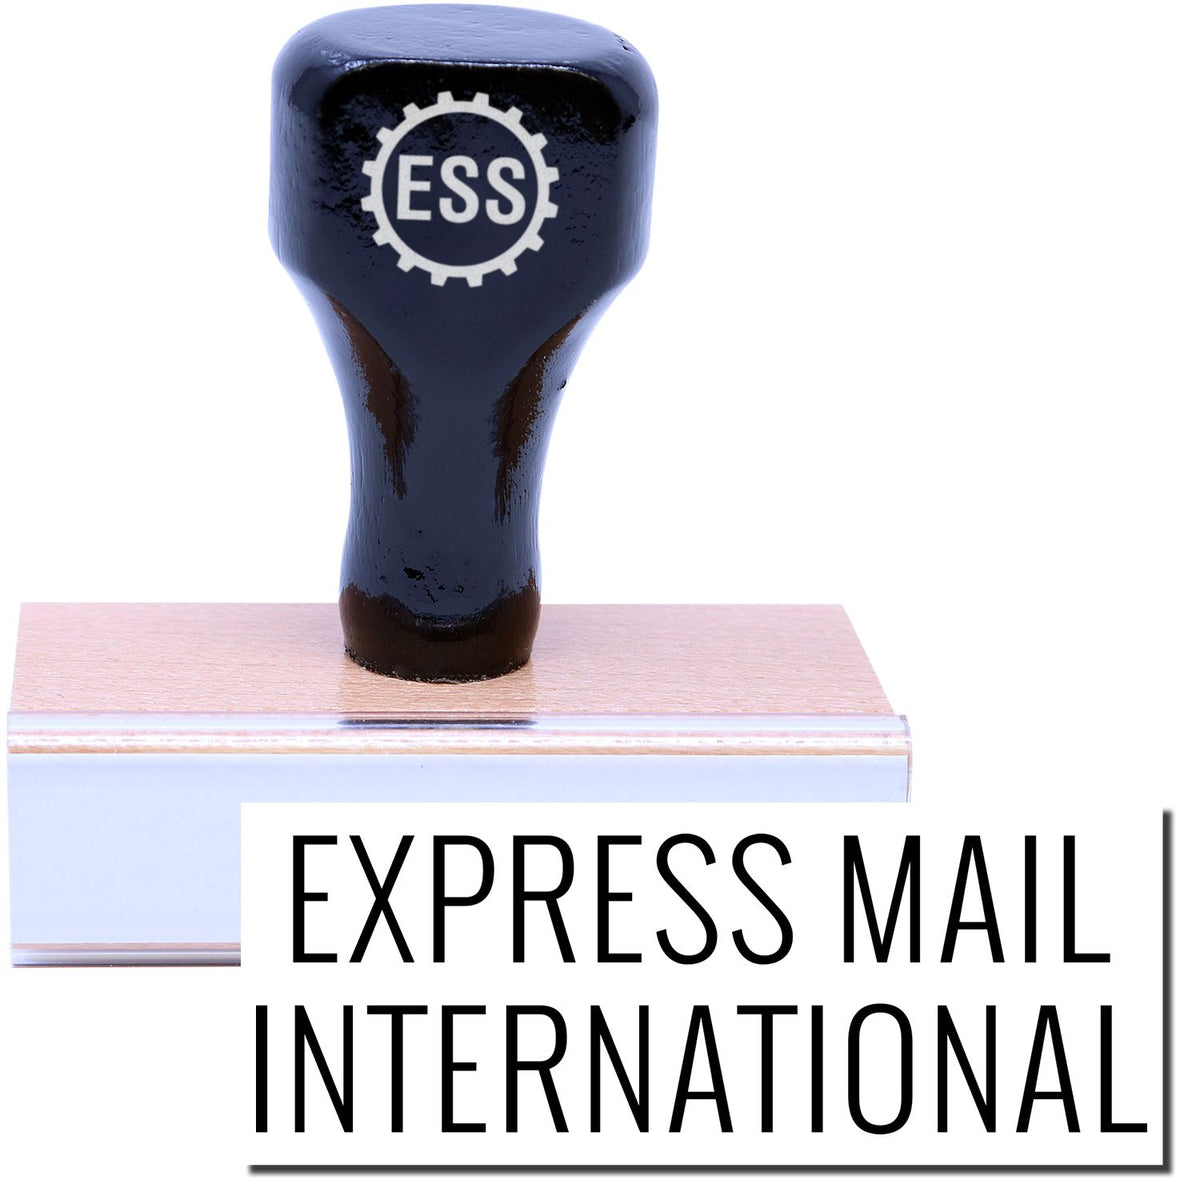 A stock office rubber stamp with a stamped image showing how the text &quot;EXPRESS MAIL INTERNATIONAL&quot; is displayed after stamping.